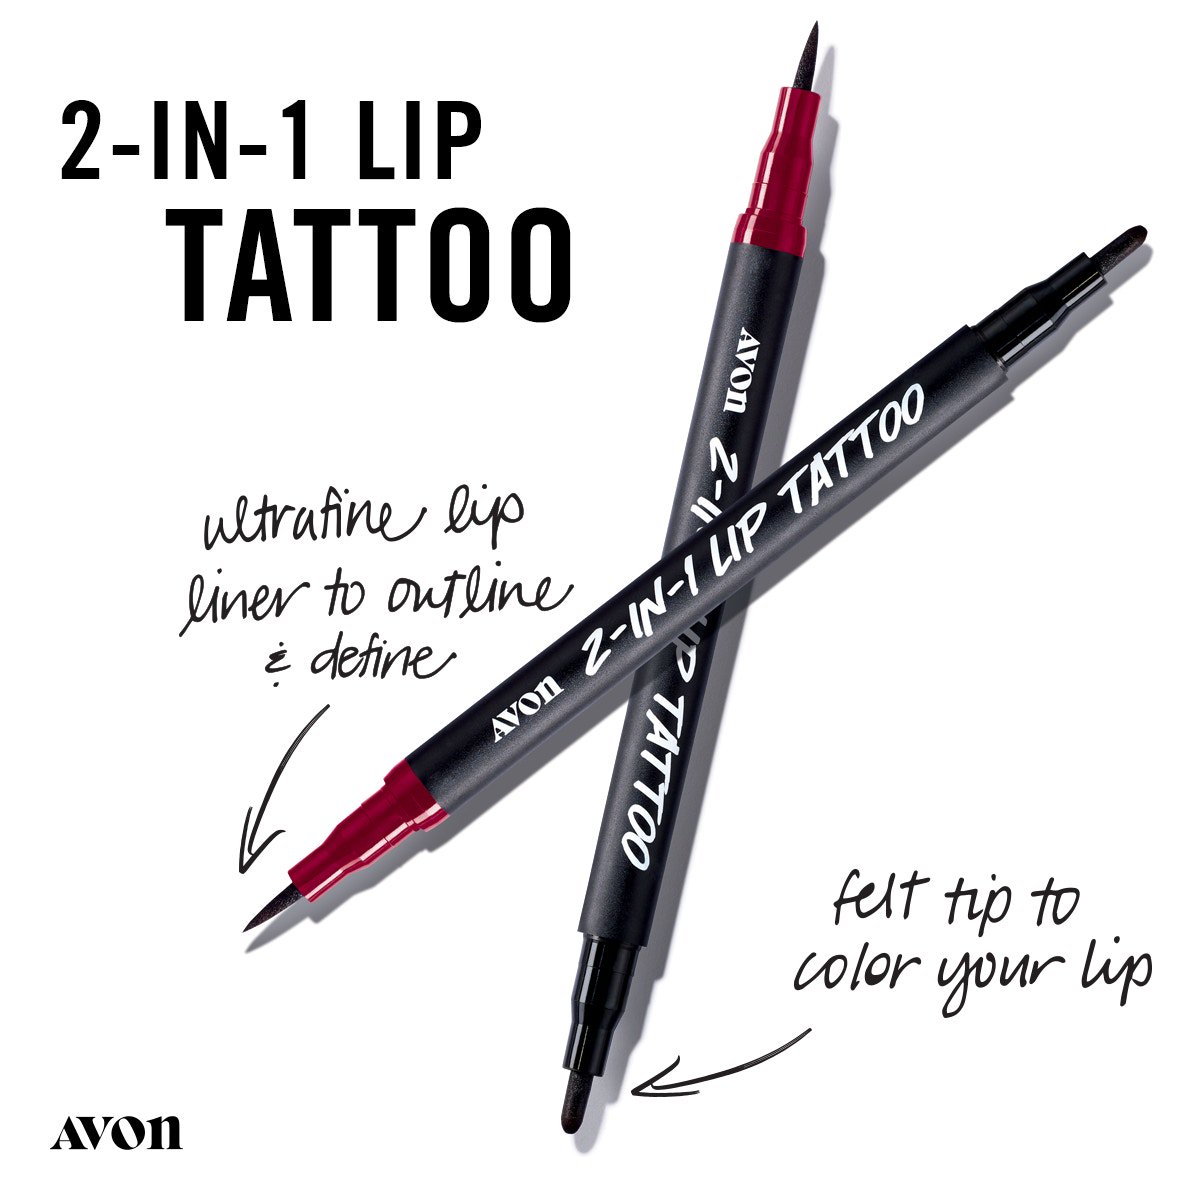 Saturated color with serious staying power!
Check out our all new online exclusive lip tattoo on my online store!💄💄💄🥰💗
go.youravon.com/3fhsqr
@avoninsider
#avonnow
#liptattoo
#bossbabes